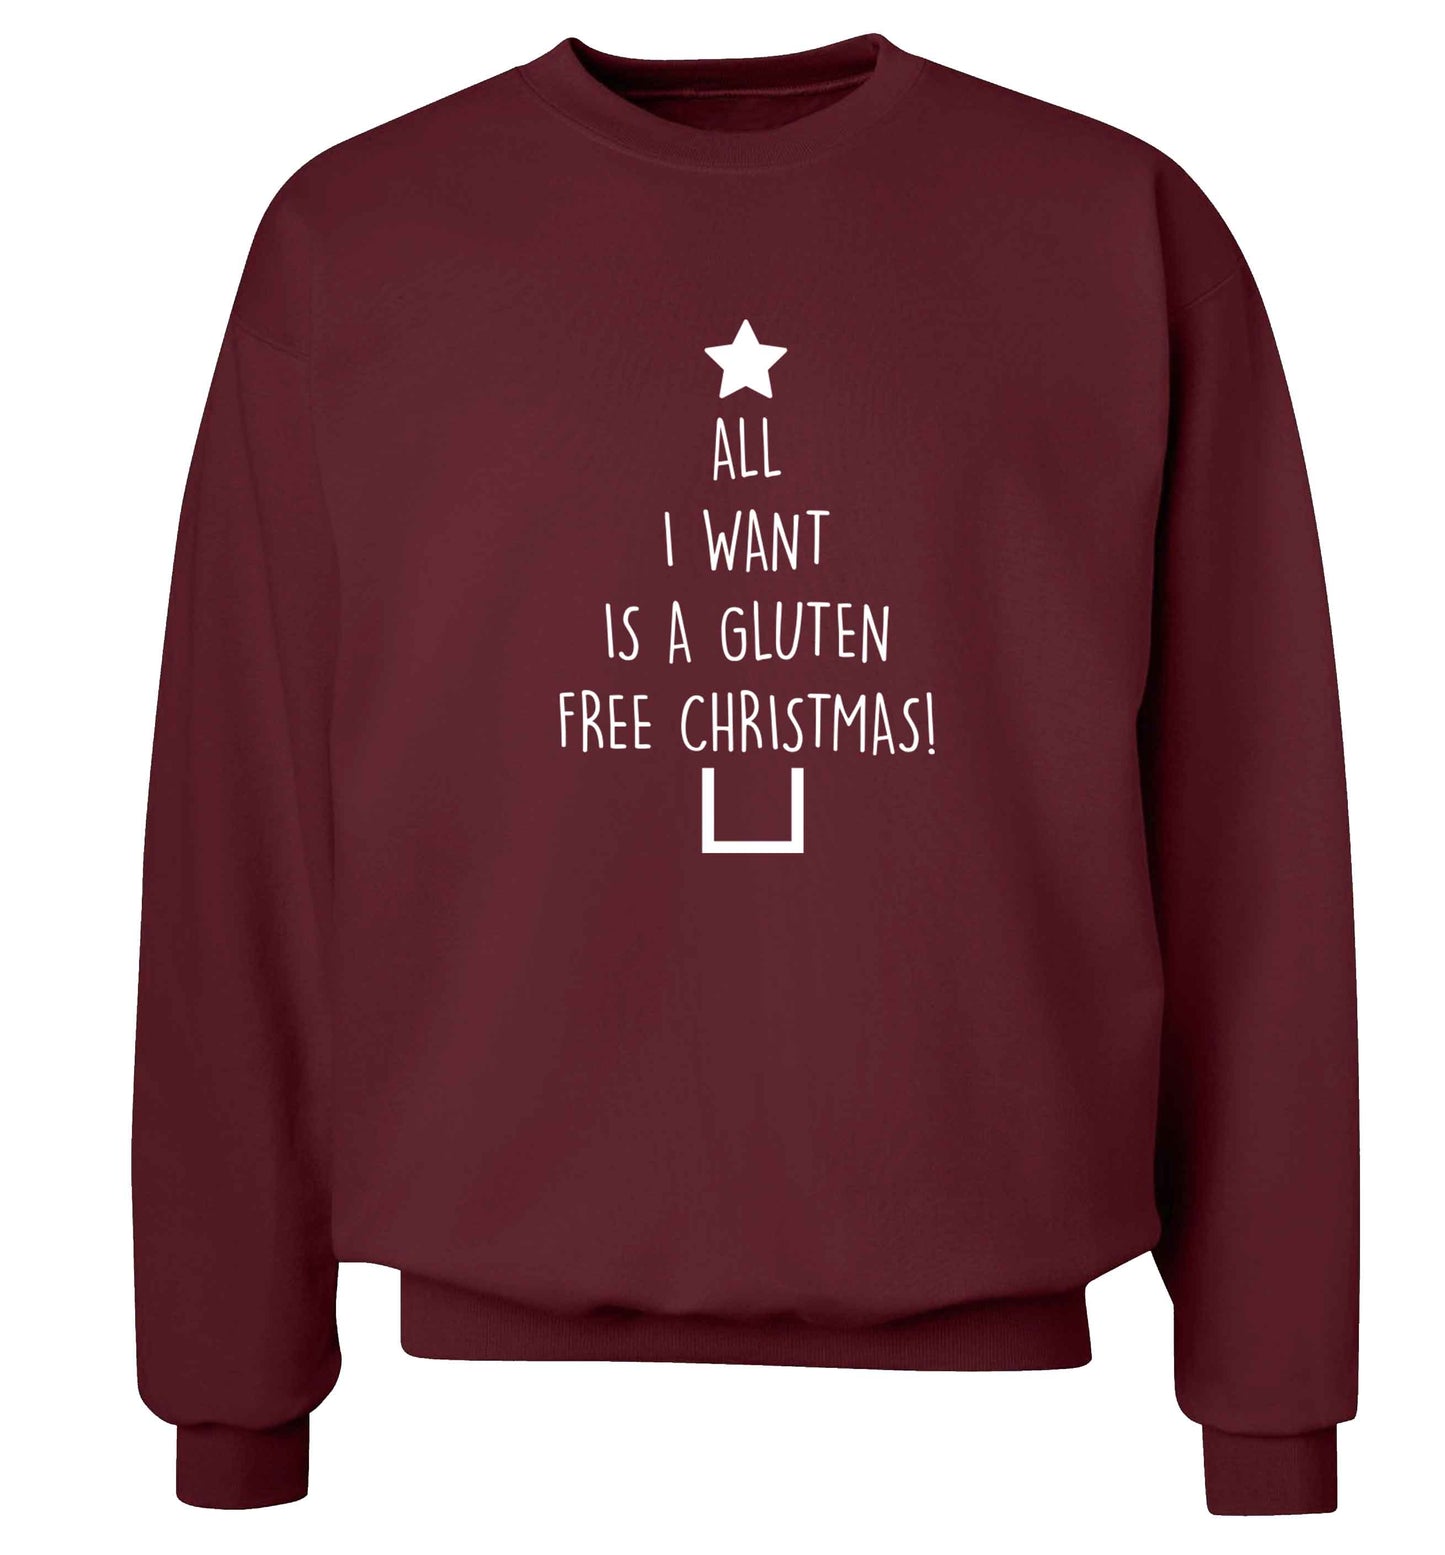 All I want is a gluten free Christmas Adult's unisex maroon Sweater 2XL